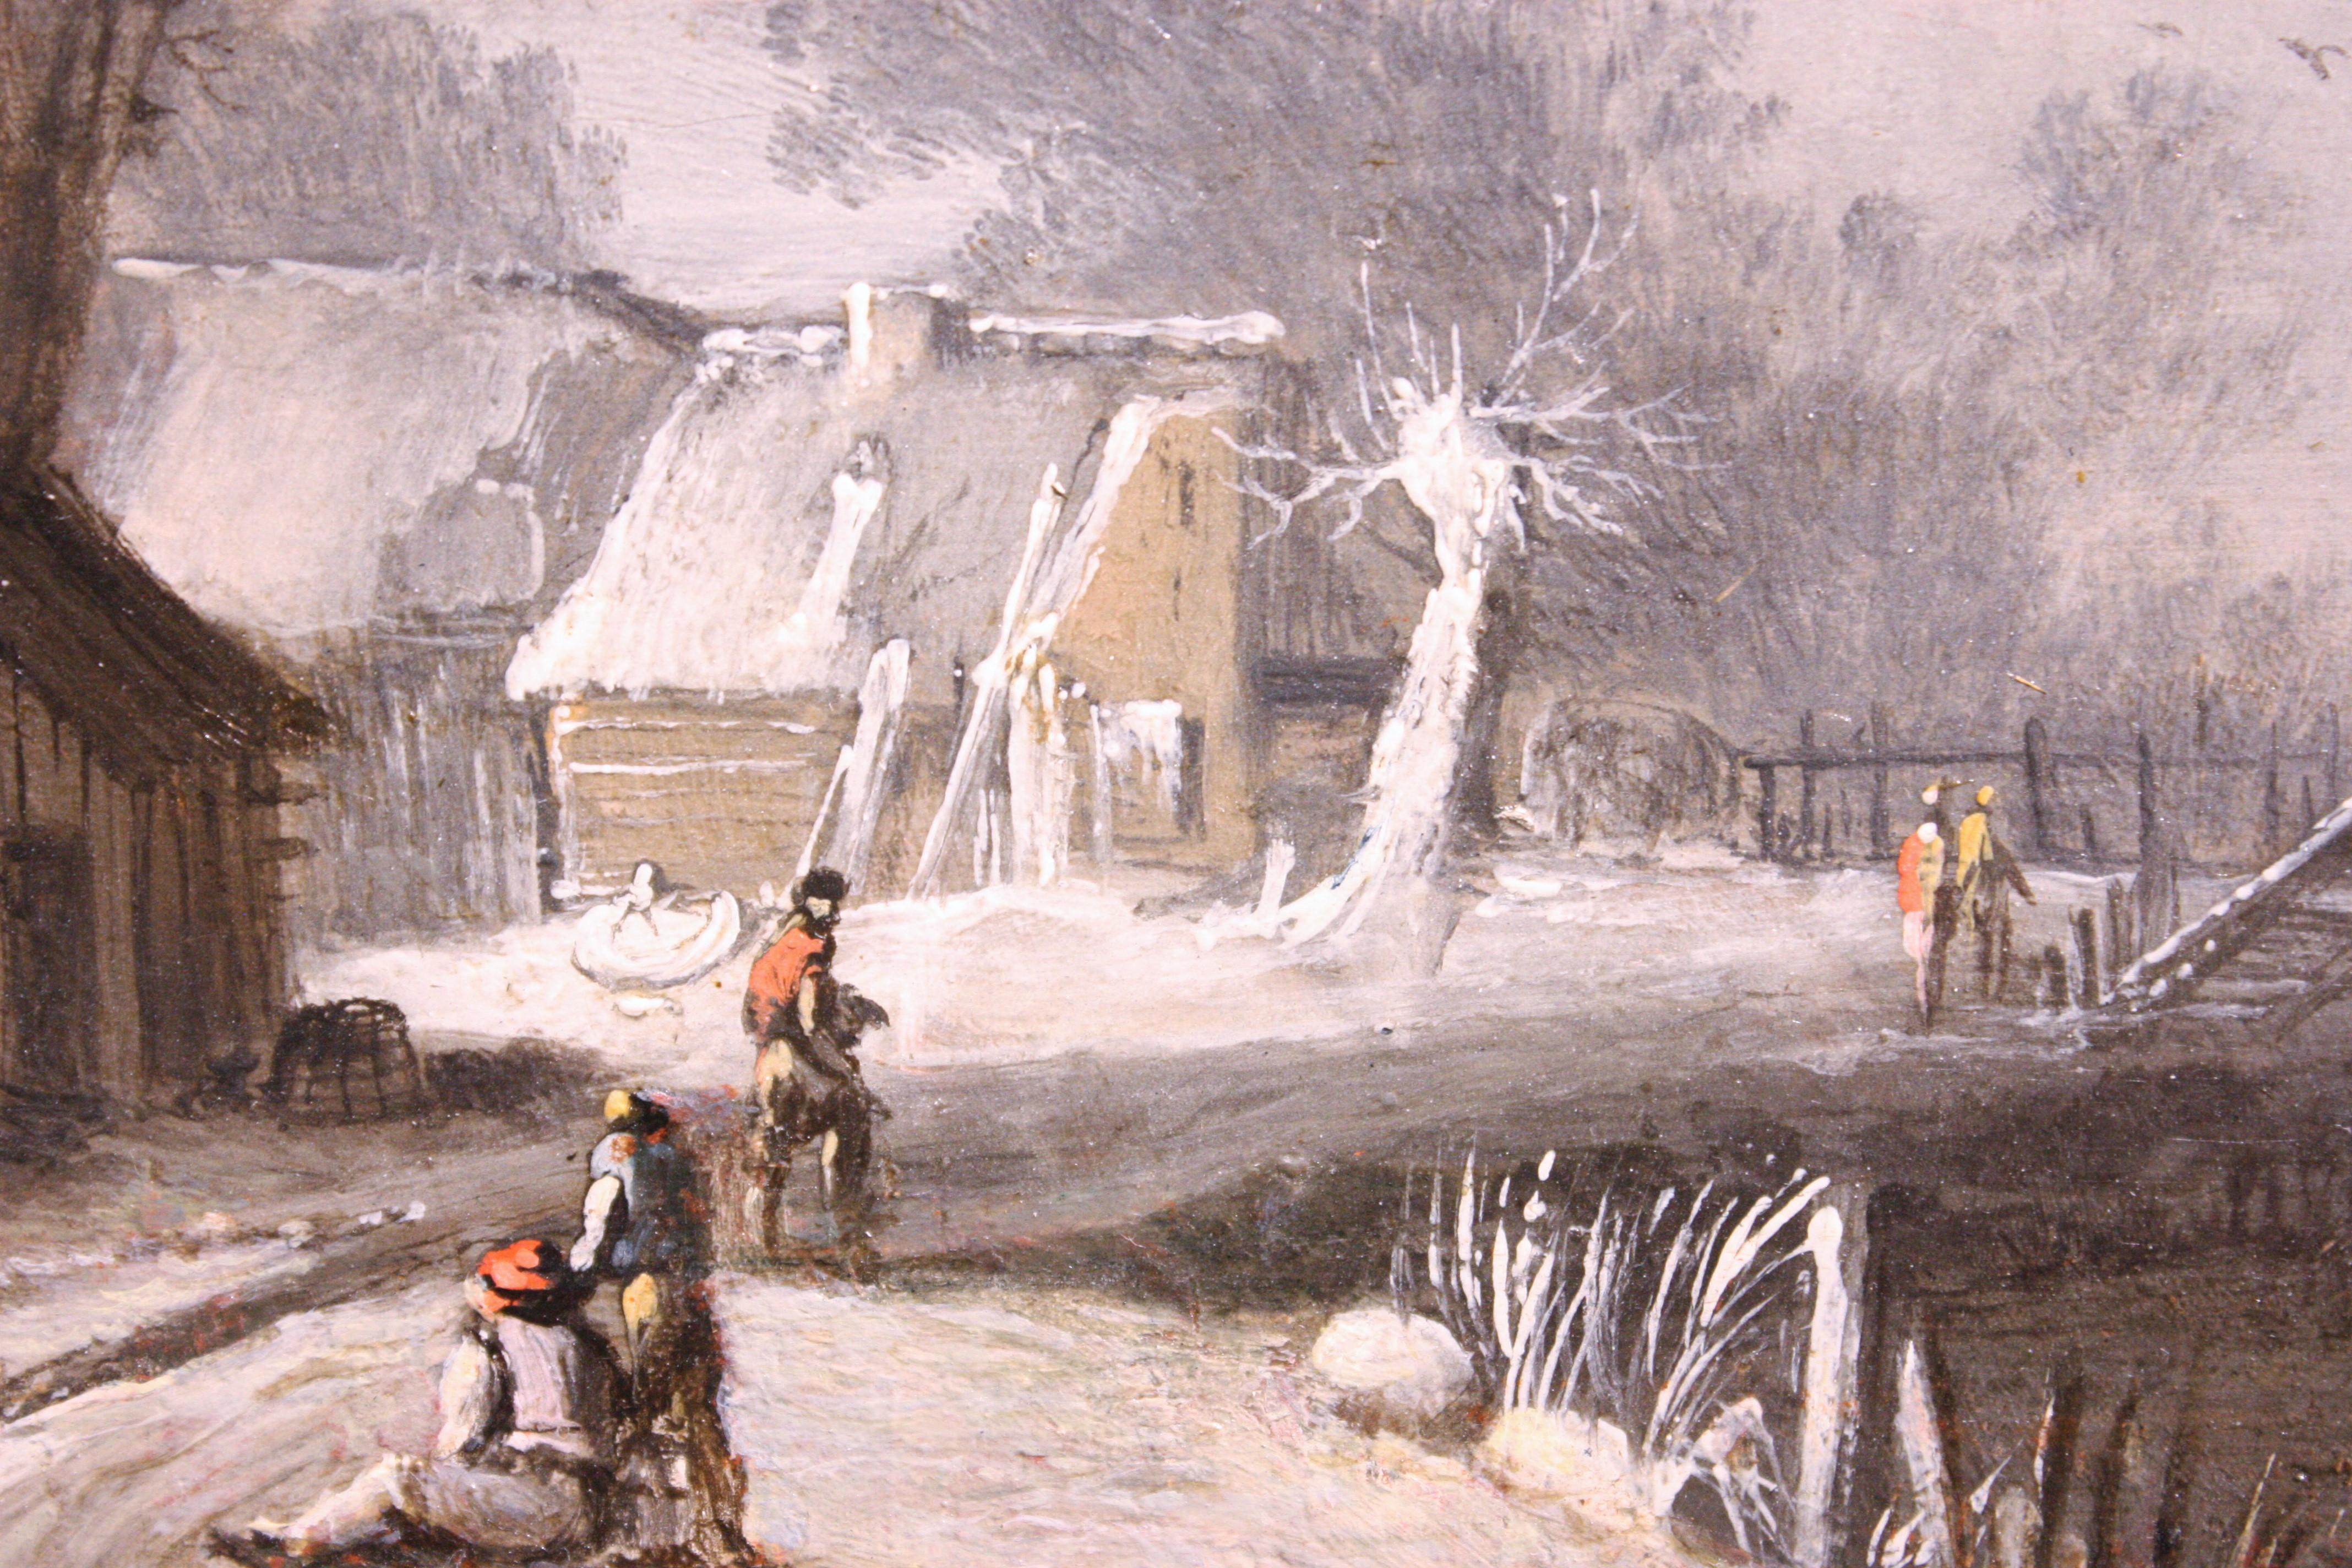 Winter Landscape at the farm, Circle of Klaes Molenaer, 17th Century
The composition of our work is divided into two distinct parts, to the left the farmhouse with snow-covered thatched roofs is separated by a cleared path, and to the right the